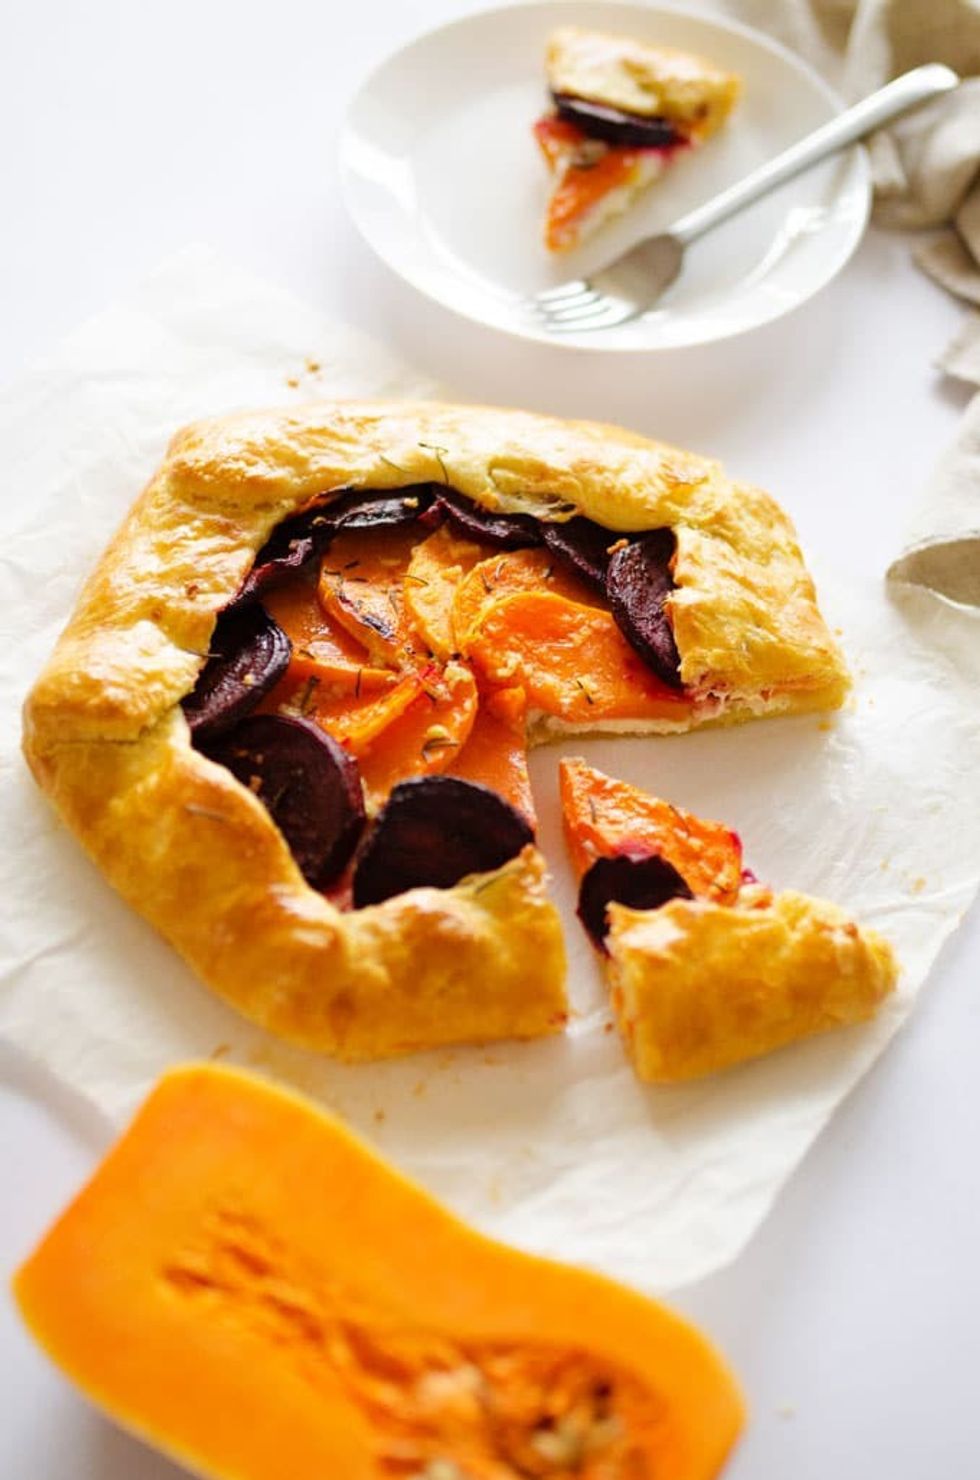 Savory Galette with Butternut Squash, Beets, and Ricotta